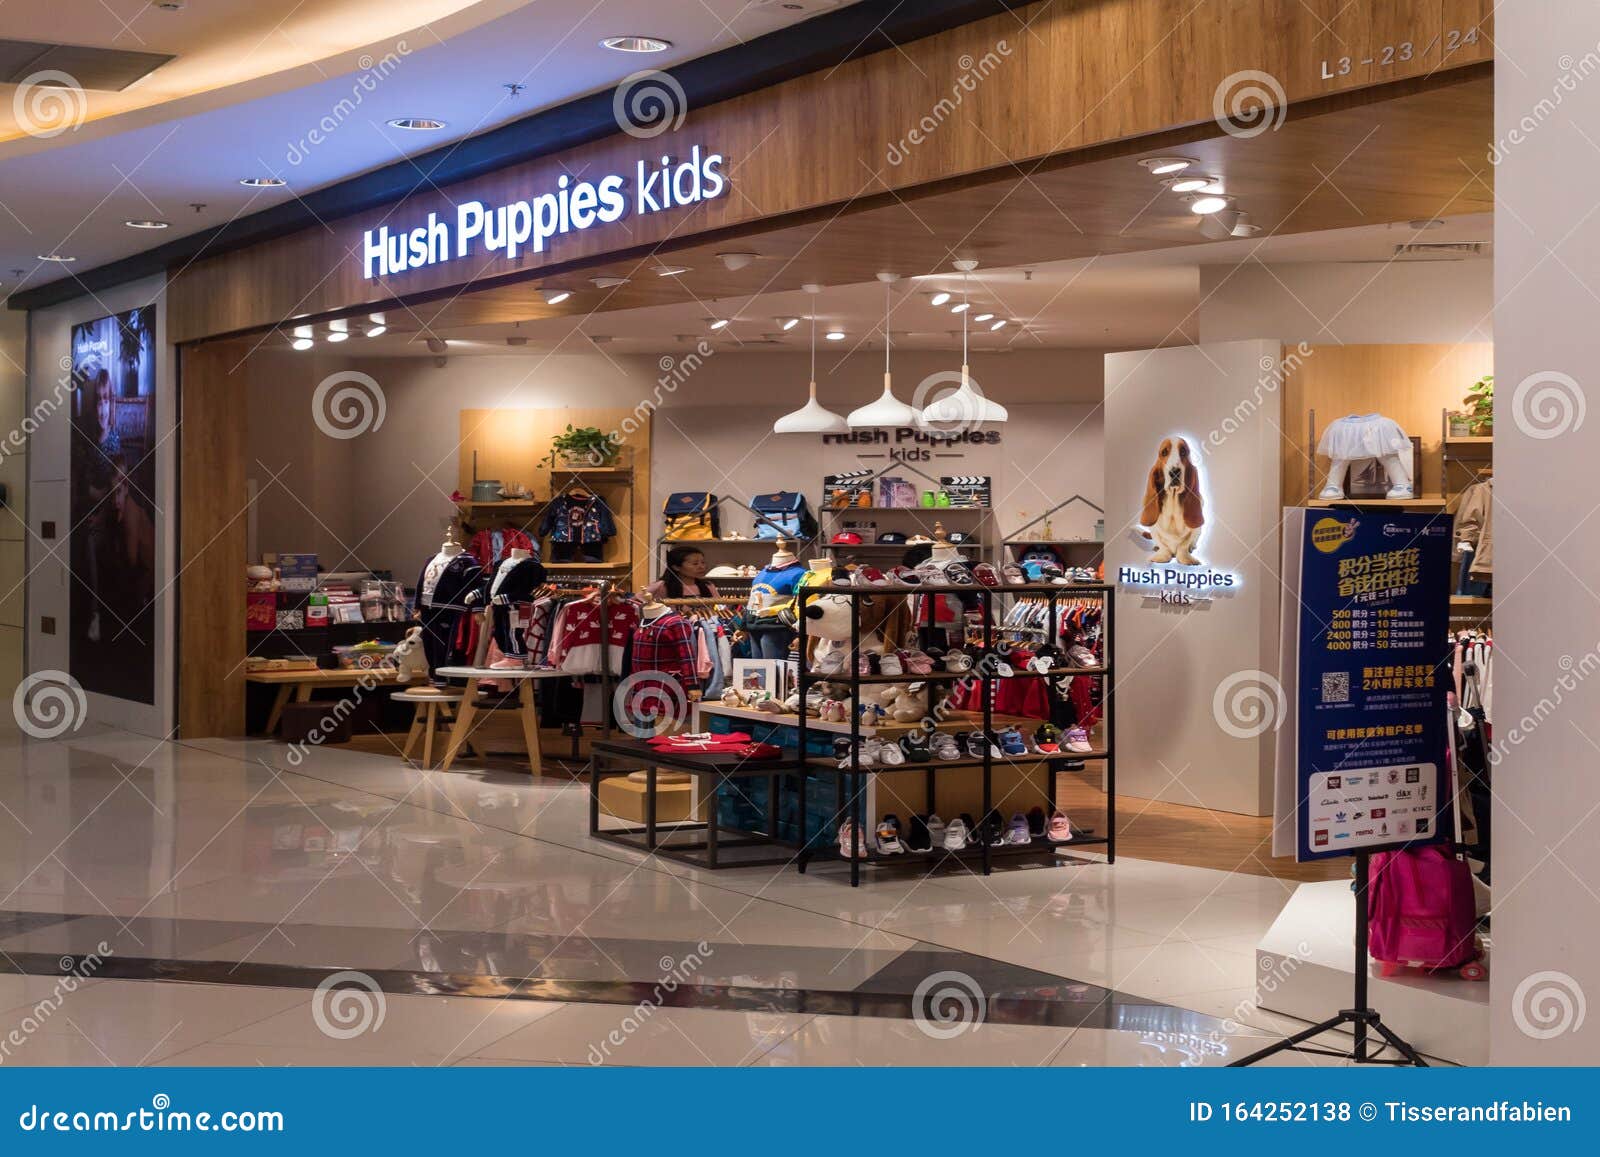 Hush Puppies Kids Store in Shanghai, China, Editorial Photo - contemporary, business: 164252138